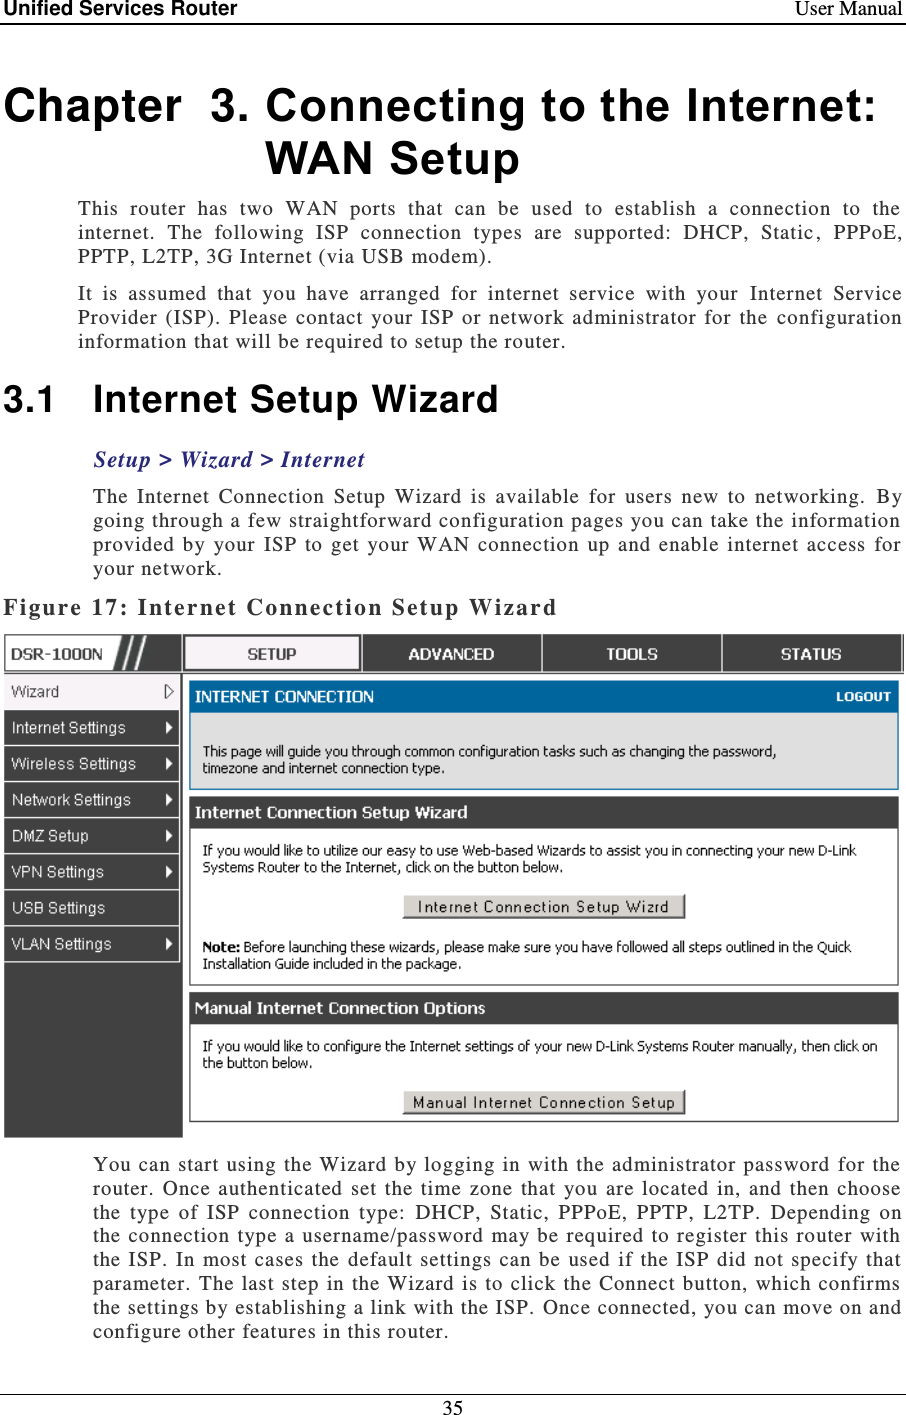 Unified Services Router    User Manual 35  Chapter  3. Connecting to the Internet: WAN Setup This  router  has  two  WAN  ports  that  can  be  used  to  establish  a  connection  to  the internet.  The  following  ISP  connection  types  are  supported:  DHCP,  Static ,  PPPoE, PPTP, L2TP, 3G Internet (via USB modem).     It  is  assumed  that  you  have  arranged  for  internet  service  with  your   Internet  Service Provider  (ISP).  Please  contact  your  ISP  or  network  administrator  for  the  configuration information that will be required to setup the router. 3.1  Internet Setup Wizard Setup &gt; Wizard &gt; Internet The  Internet  Connection  Setup  Wizard  is  available  for  users  new  to  networking.   By going through a few straightforward configuration pages you can take the information provided  by  your  ISP  to  get  your  WAN  connection  up  and enable  internet  access  for your network.  Figure 17: Inter net Connection Set up Wizard   You  can start using the  Wizard by logging in  with  the administrator  password for the router.  Once authenticated  set  the  time  zone  that  you  are  located  in,  and  then  choose the  type  of  ISP  connection  type:  DHCP,  Static,  PPPoE,  PPTP,  L2TP.  Depending  on the  connection  type  a  username/password  may be required  to register this router  with the  ISP.  In  most  cases the  default settings  can  be  used  if  the ISP did  not specify  that parameter. The last  step in  the Wizard is to  click the Connect  button,  which confirms the settings by establishing a link with the ISP.  Once connected, you can move on and configure other features in this router. 